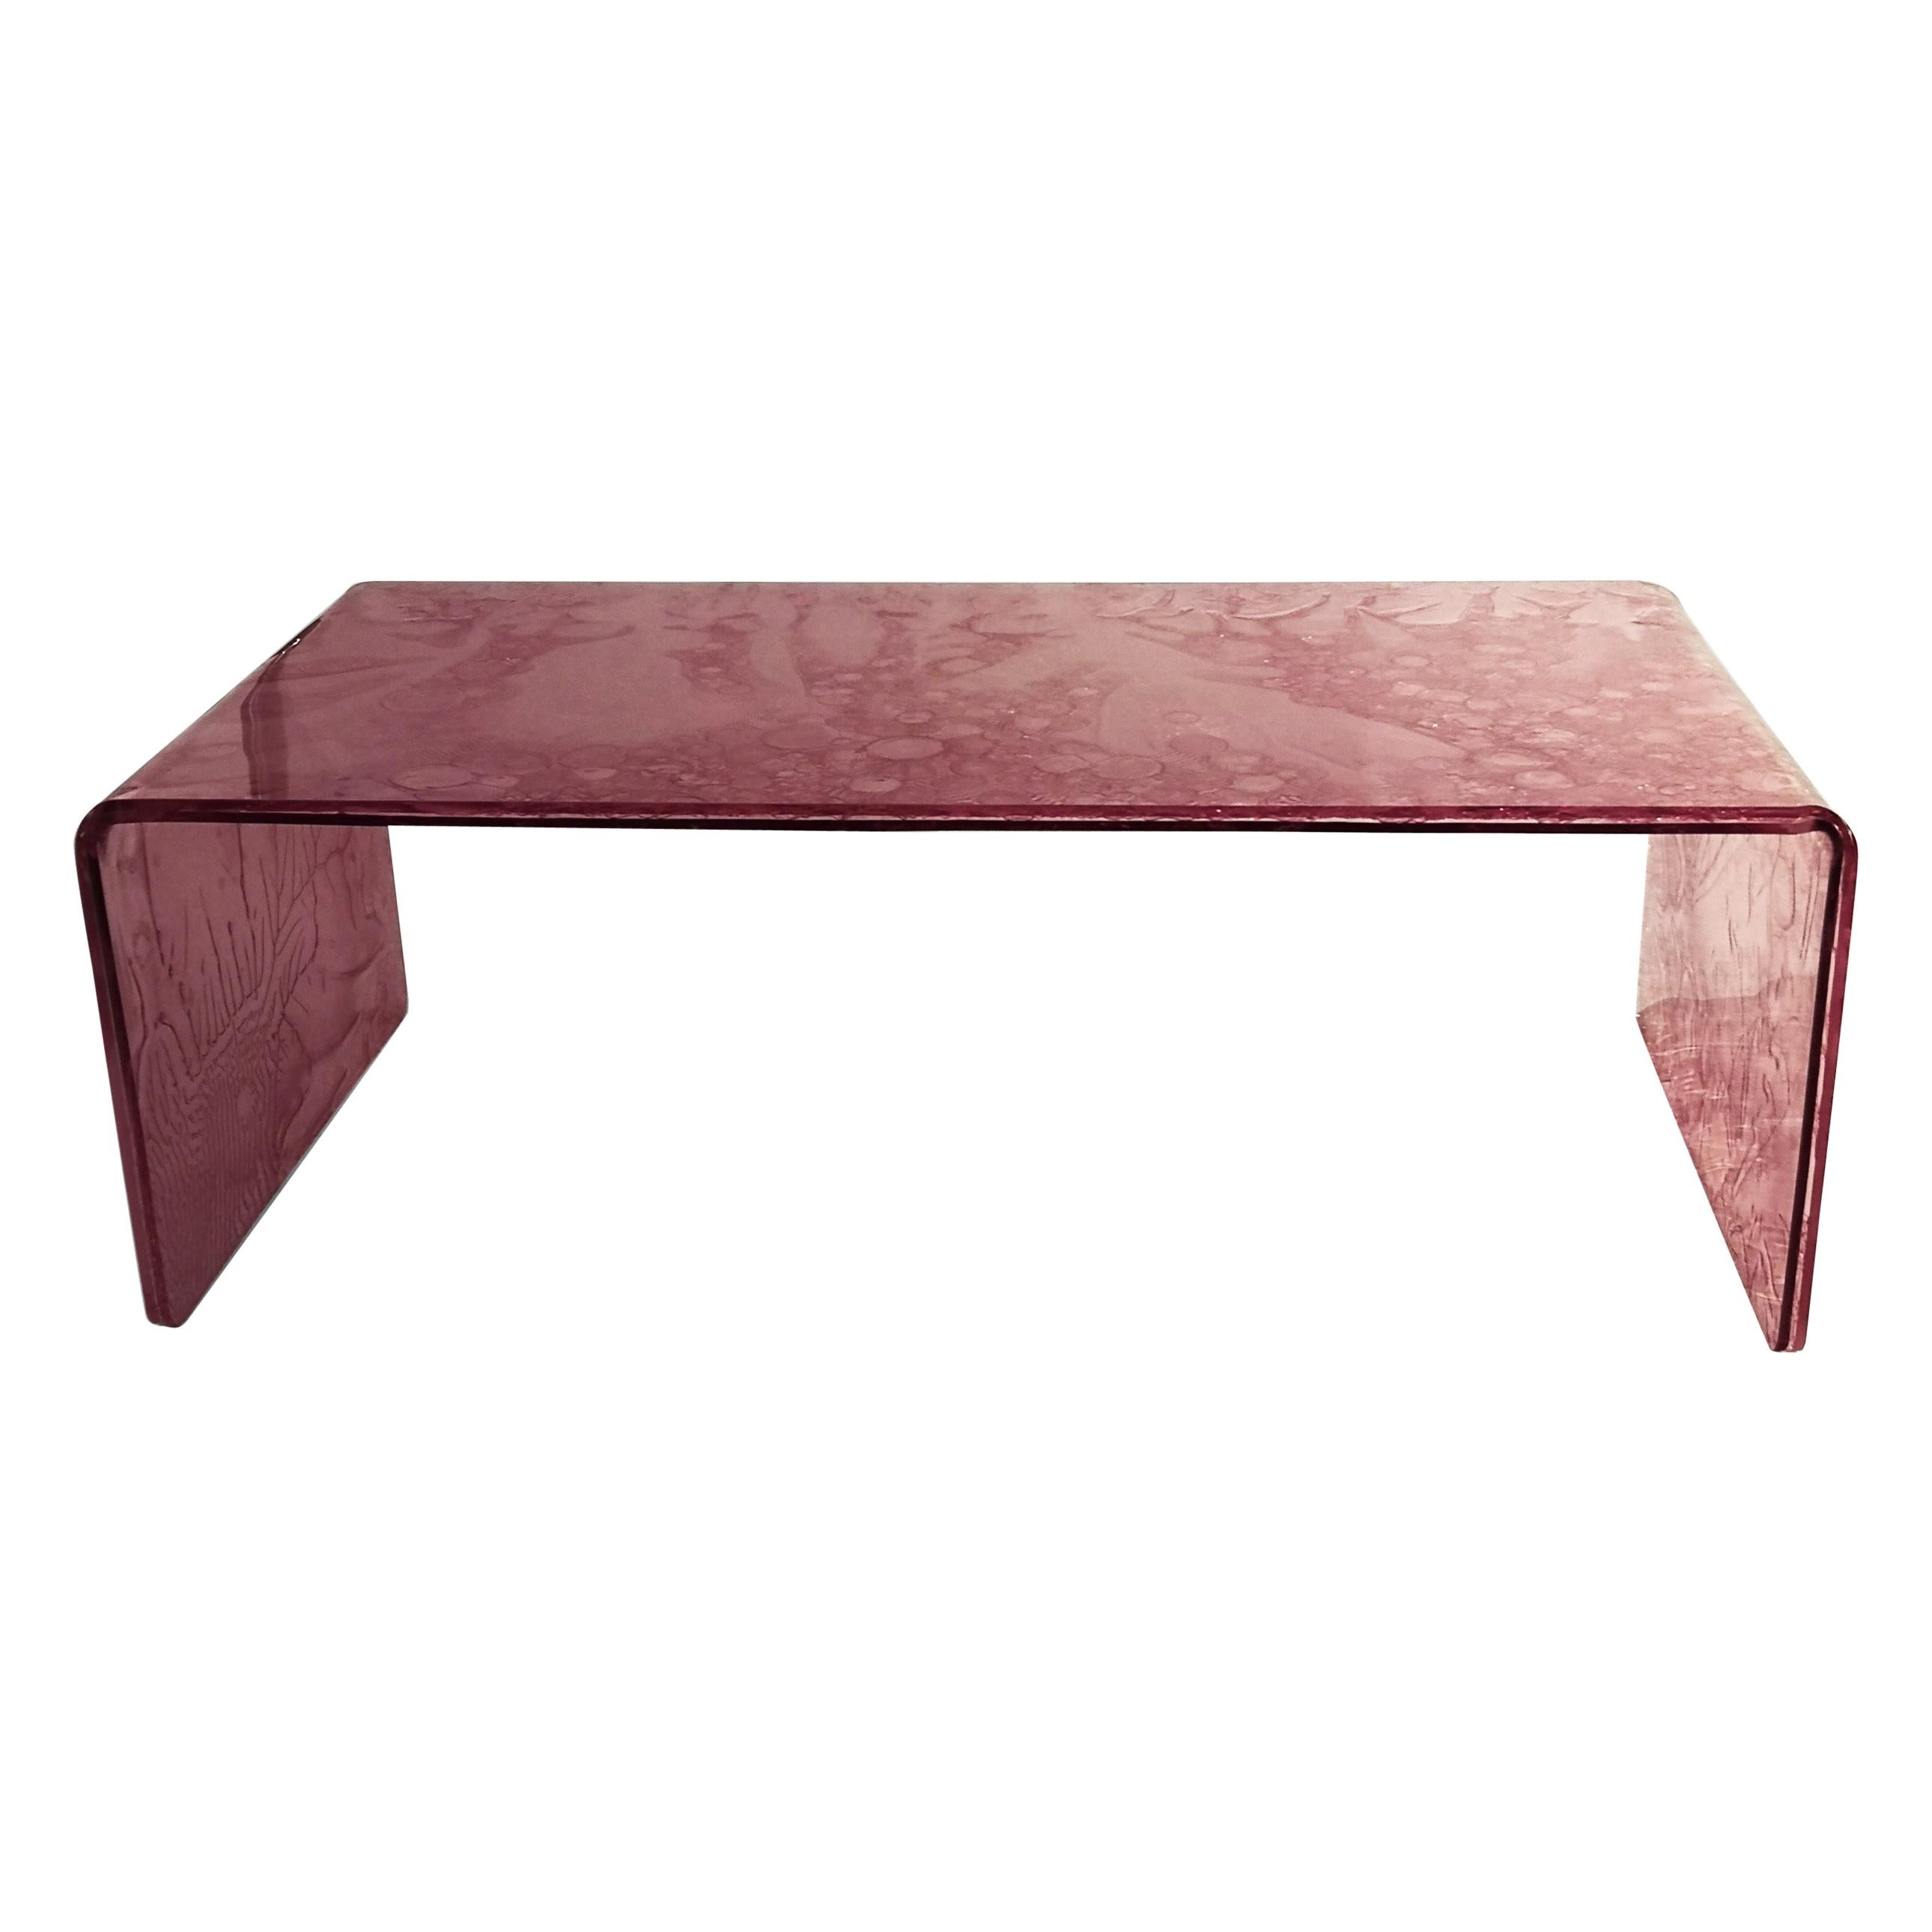 Sketch Bridge Coffeetable Made of Pink Acrylic Design Roberto Giacomucci in 2020 For Sale